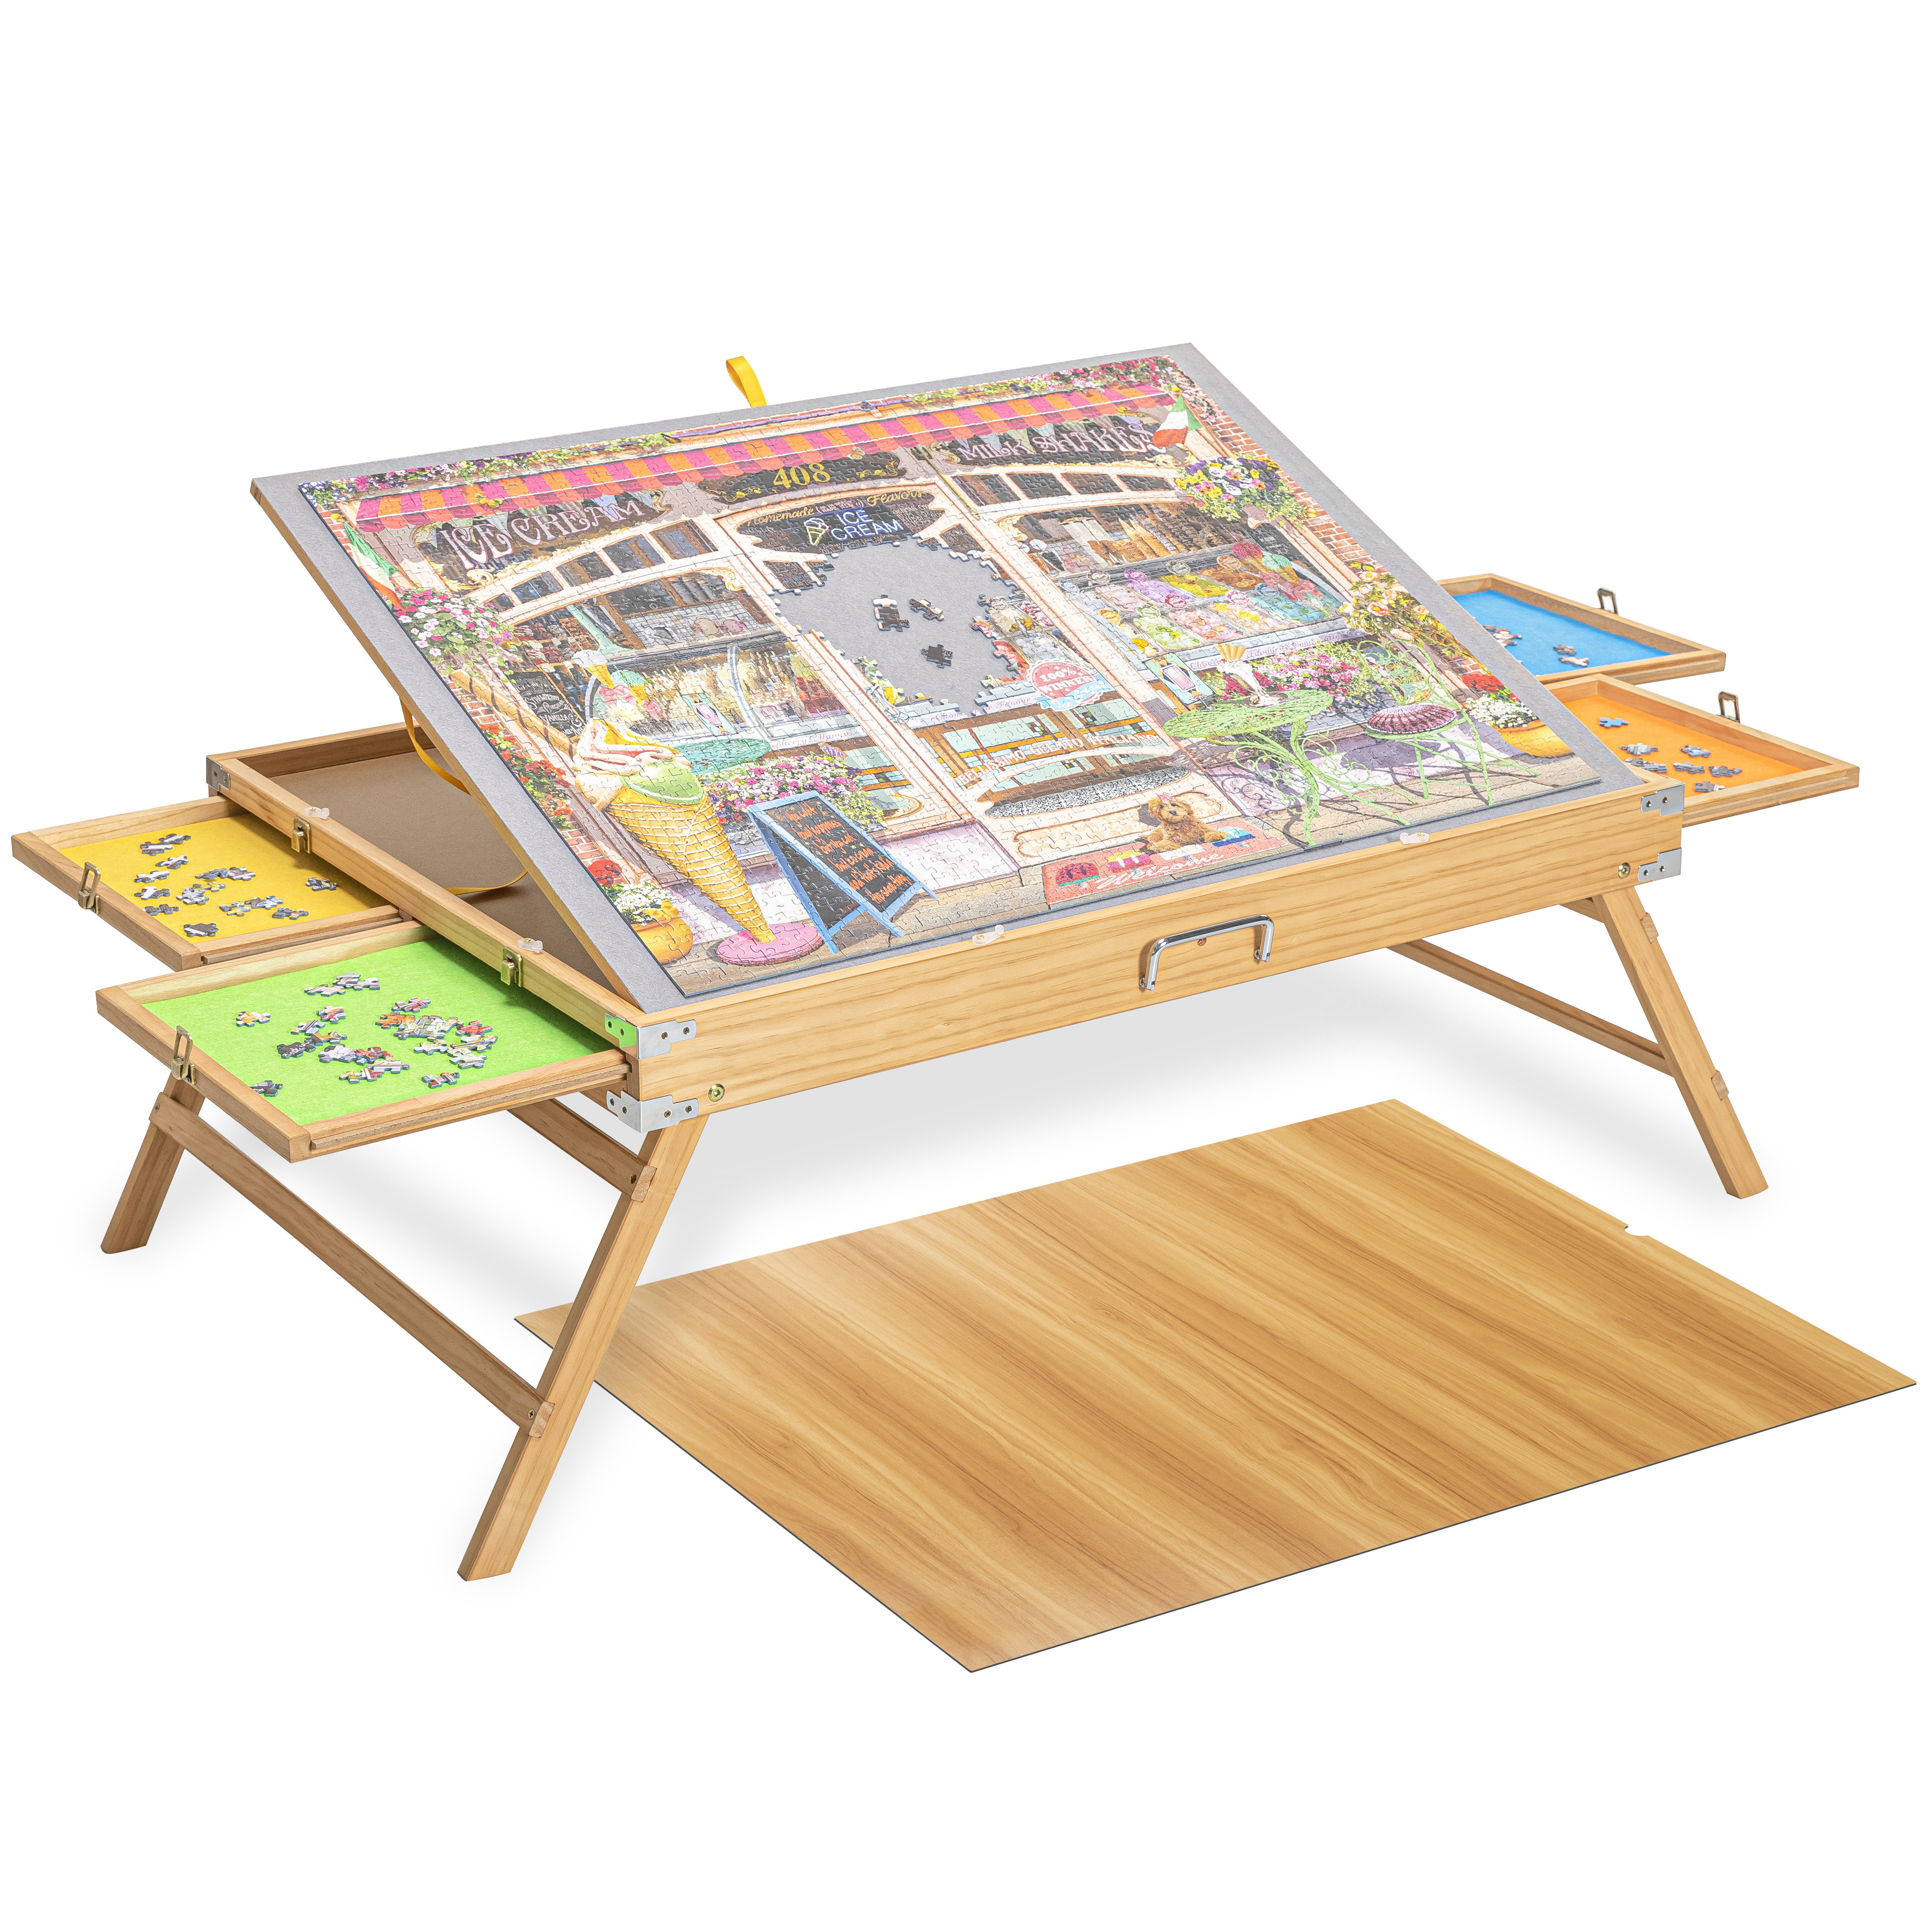 Jumbo Size: 34×26 for Maximum 1500 Pieces Puzzles, Puzzle Board